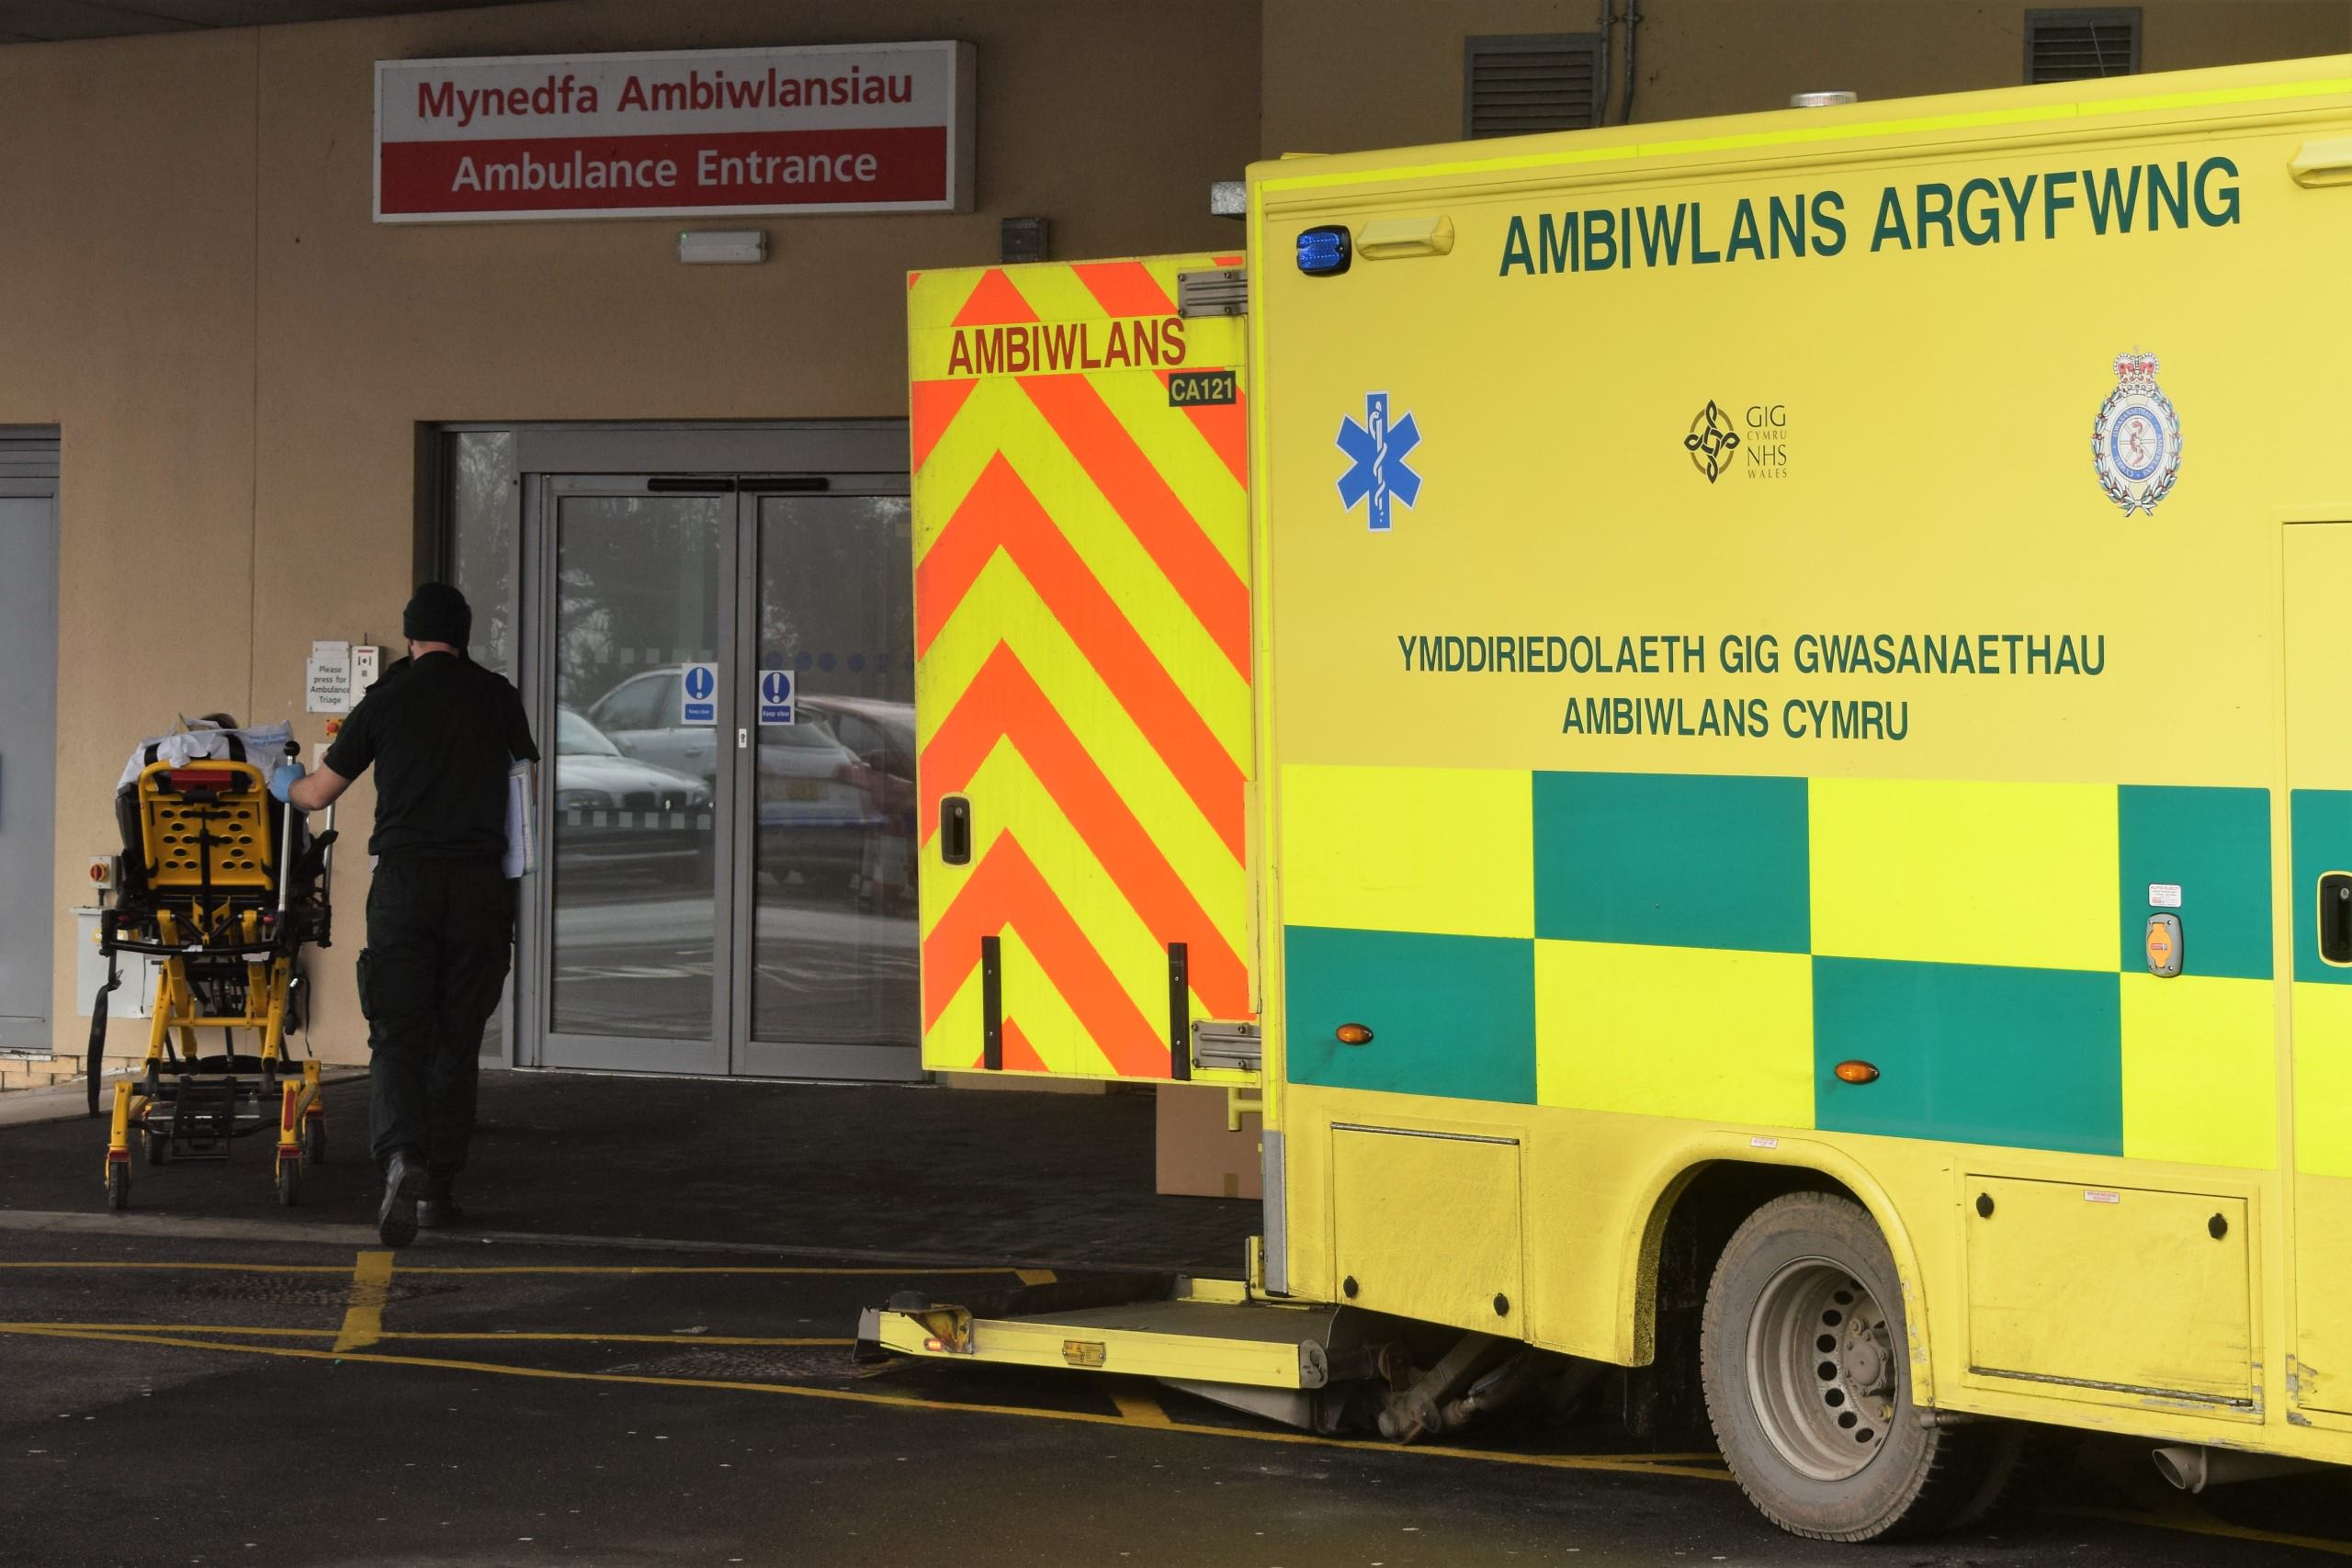 An ambulance arrives at a hospital with a patient